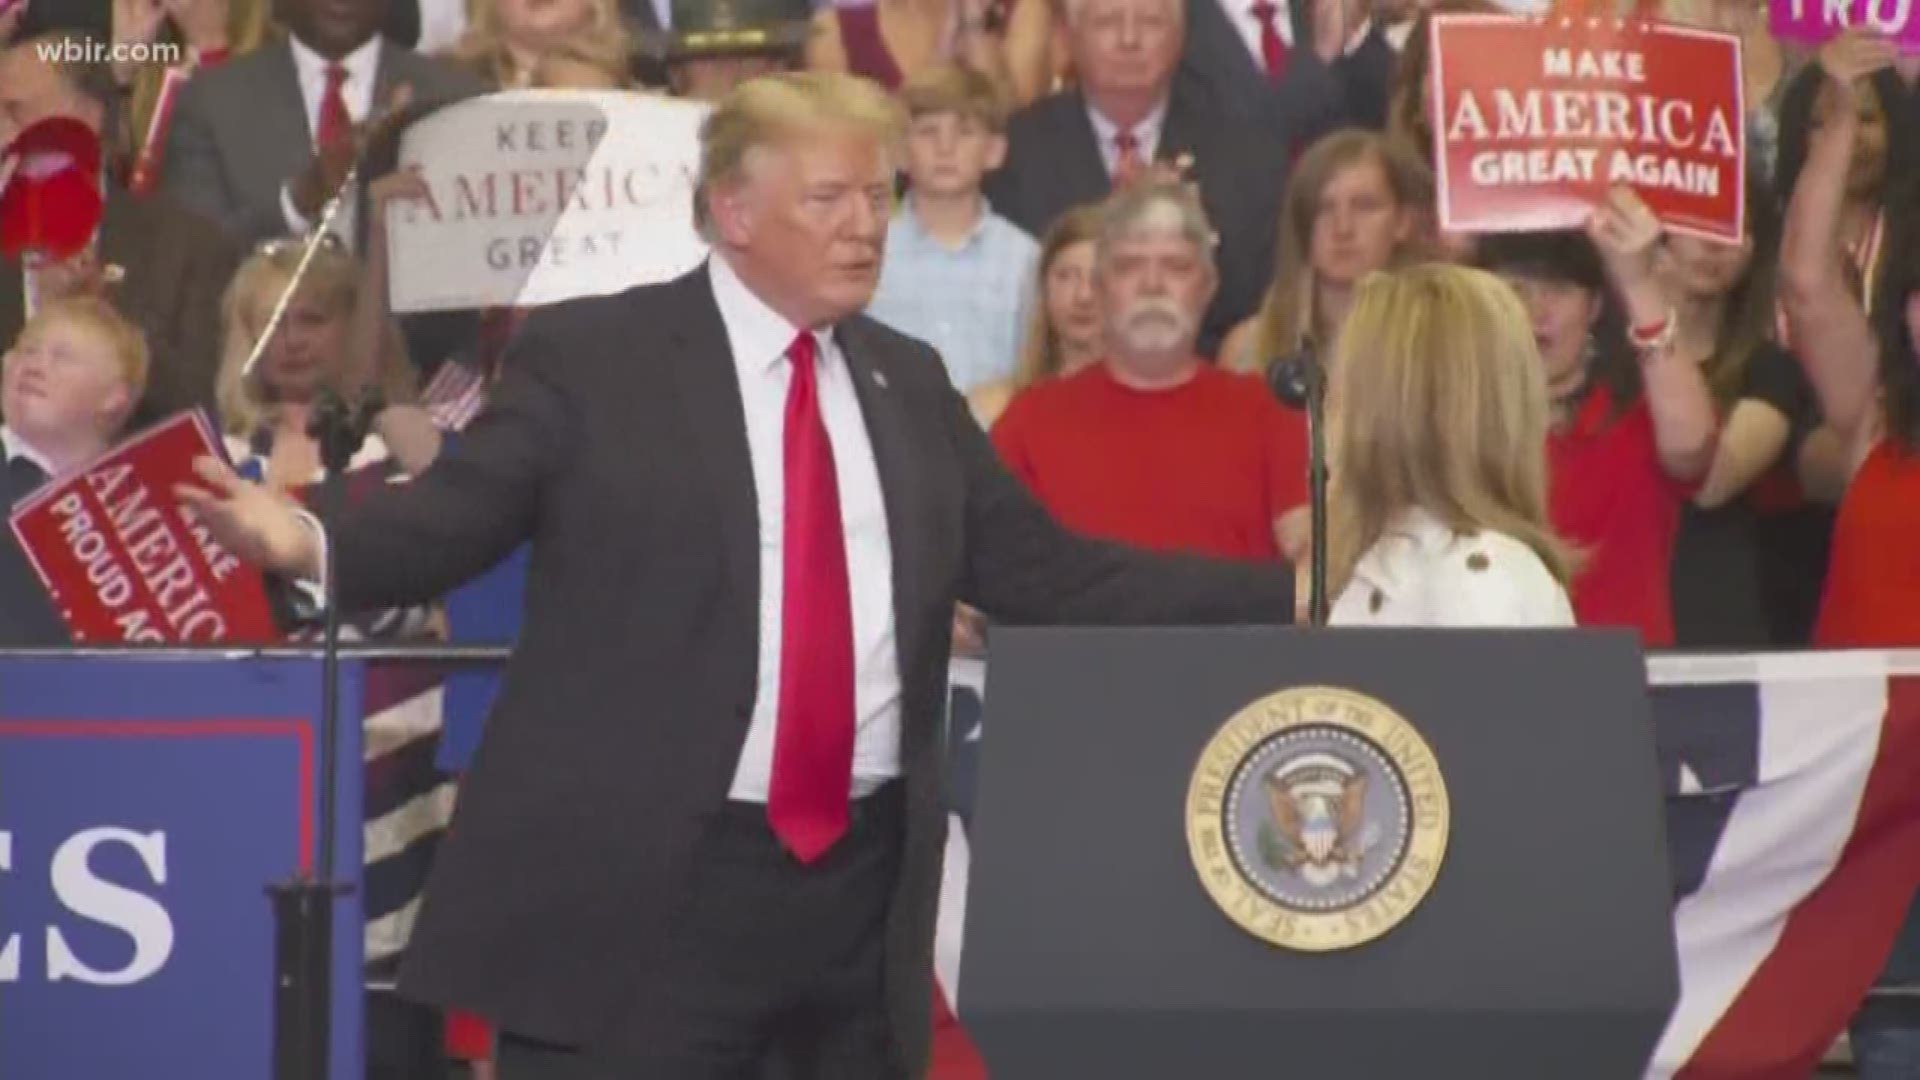 With the tight Senate race, President Trump is coming back to East Tennessee ahead of election day.